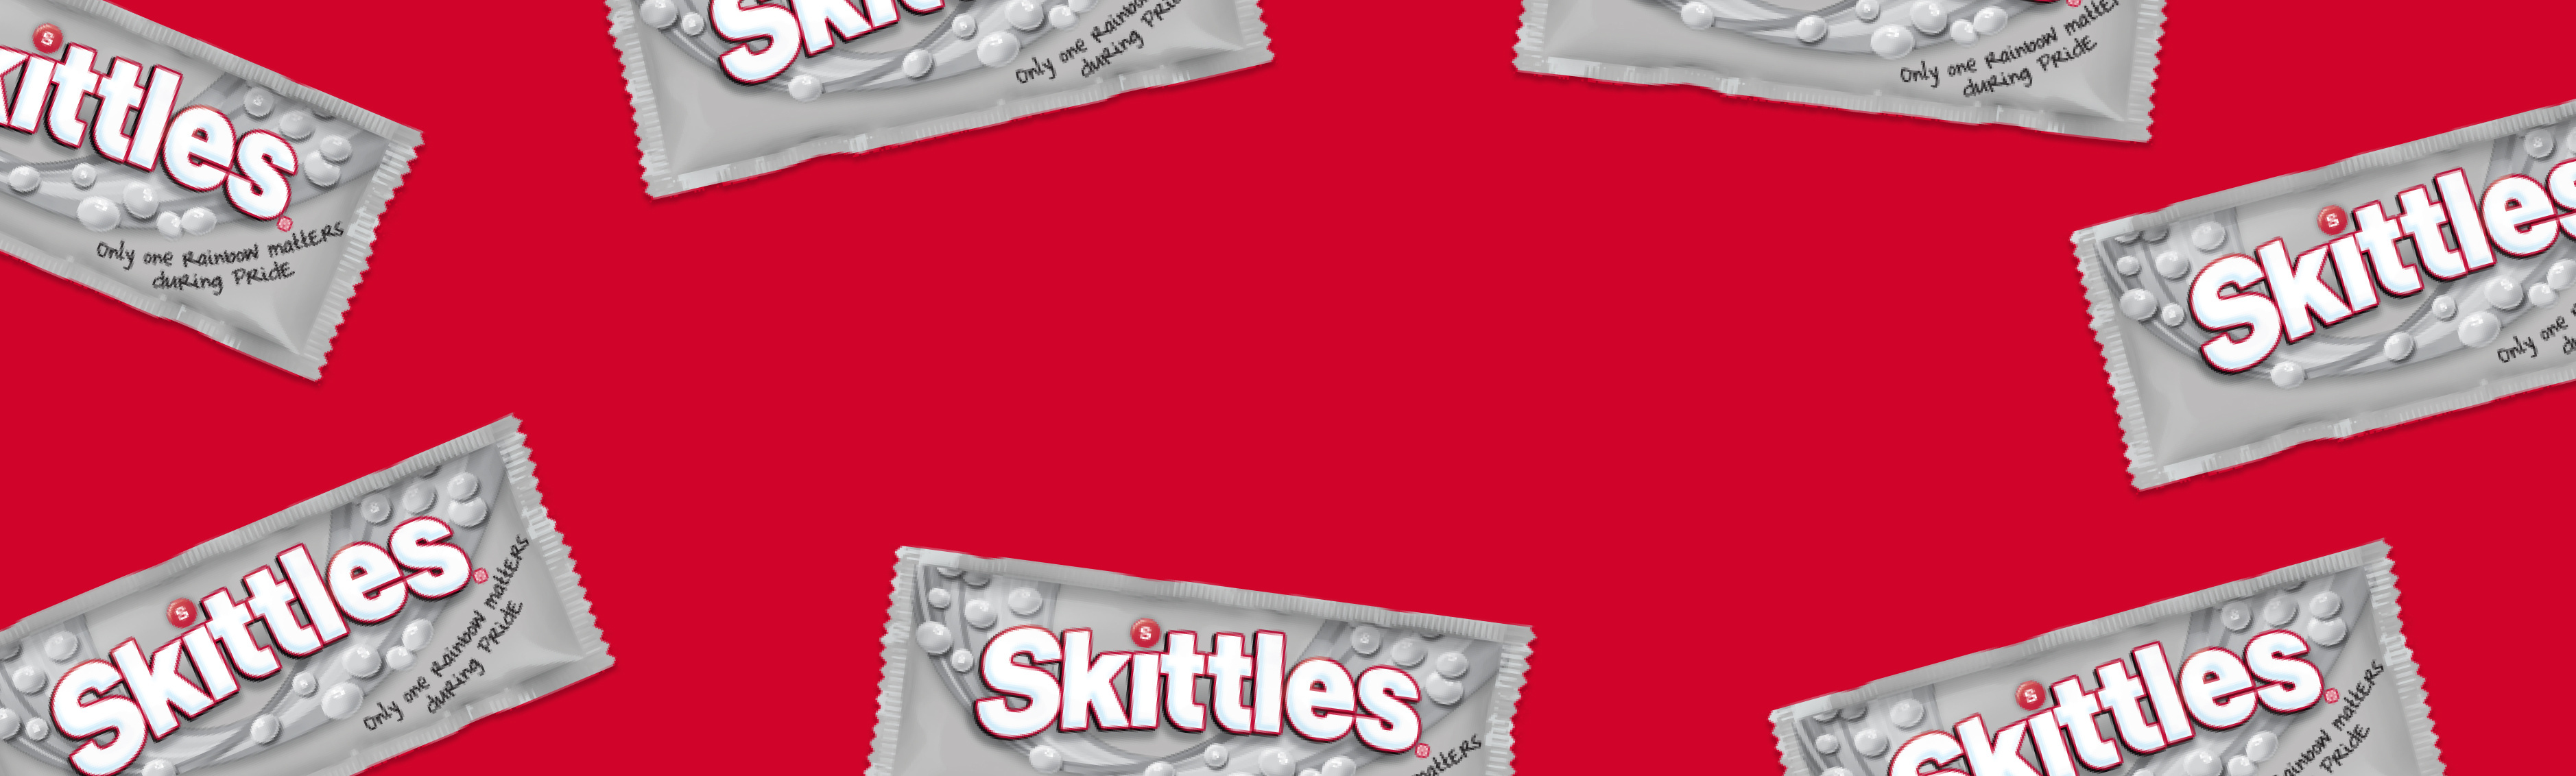 Skittles pride packs with red background